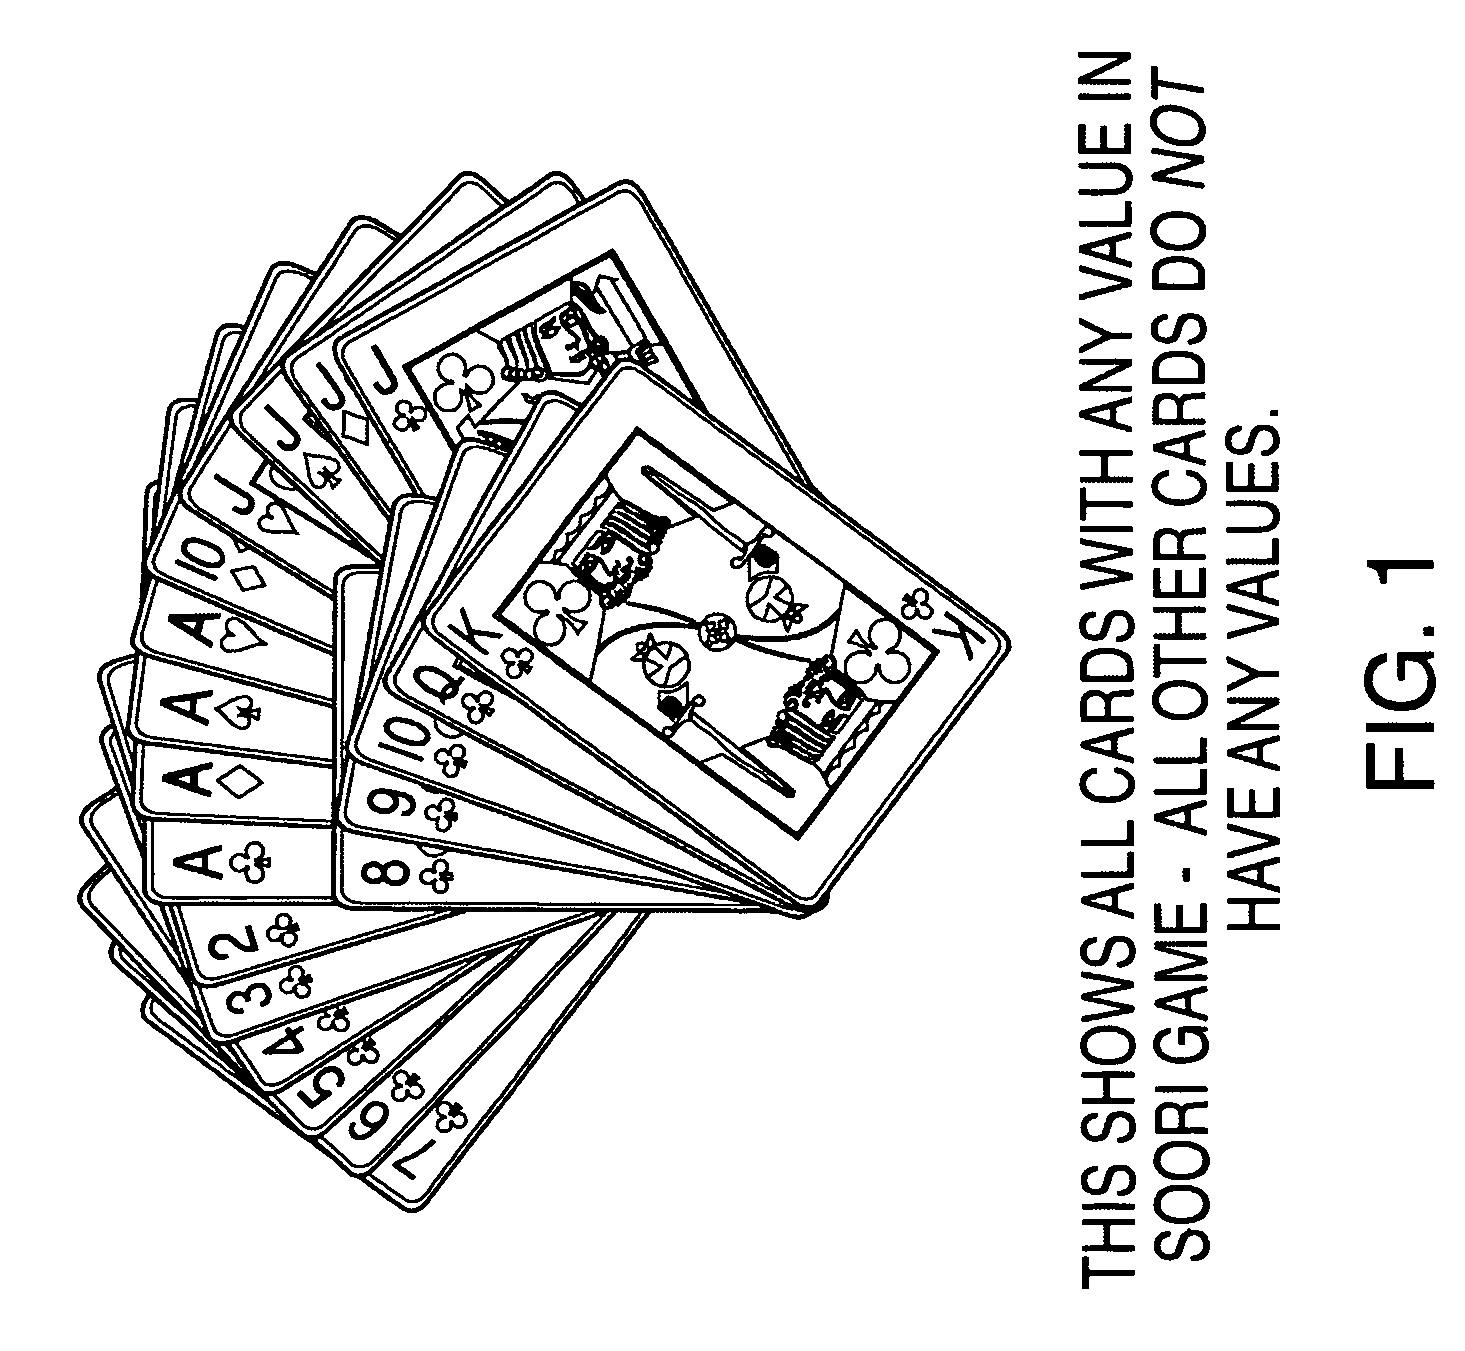 Playing card game with viewable grid array base